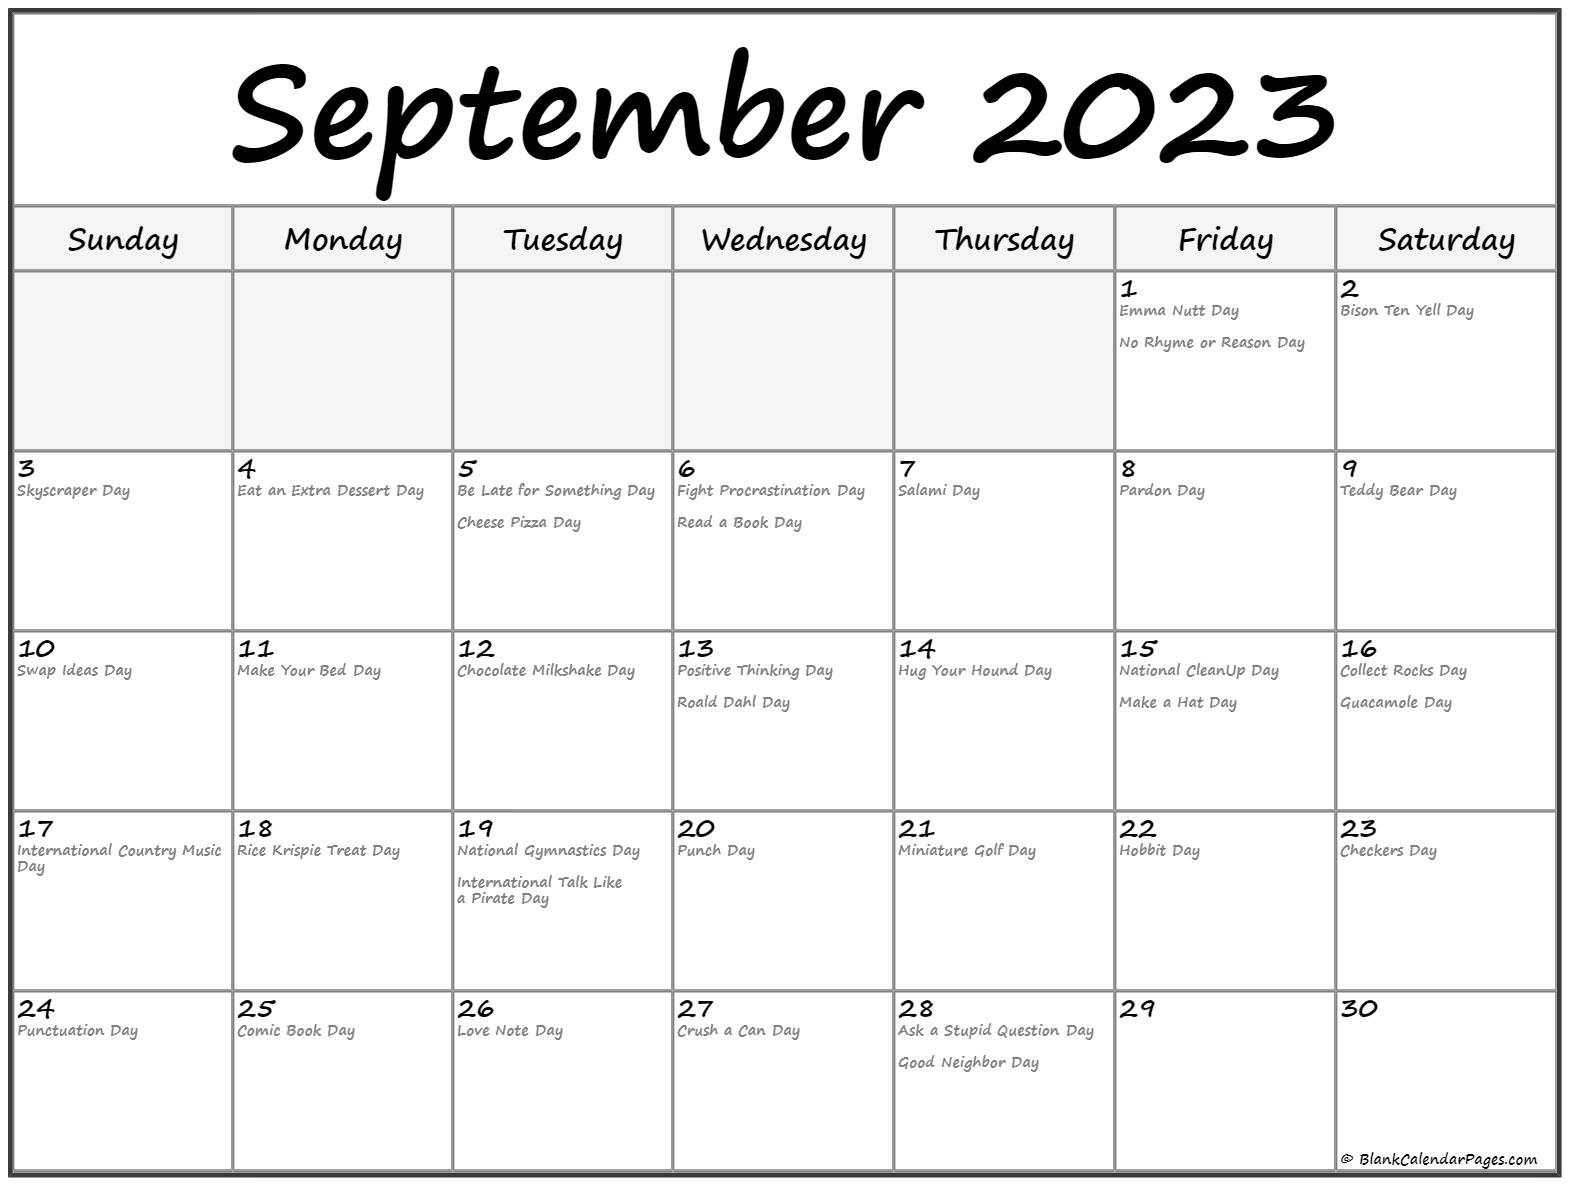 collection-of-september-2022-photo-calendars-with-image-filters